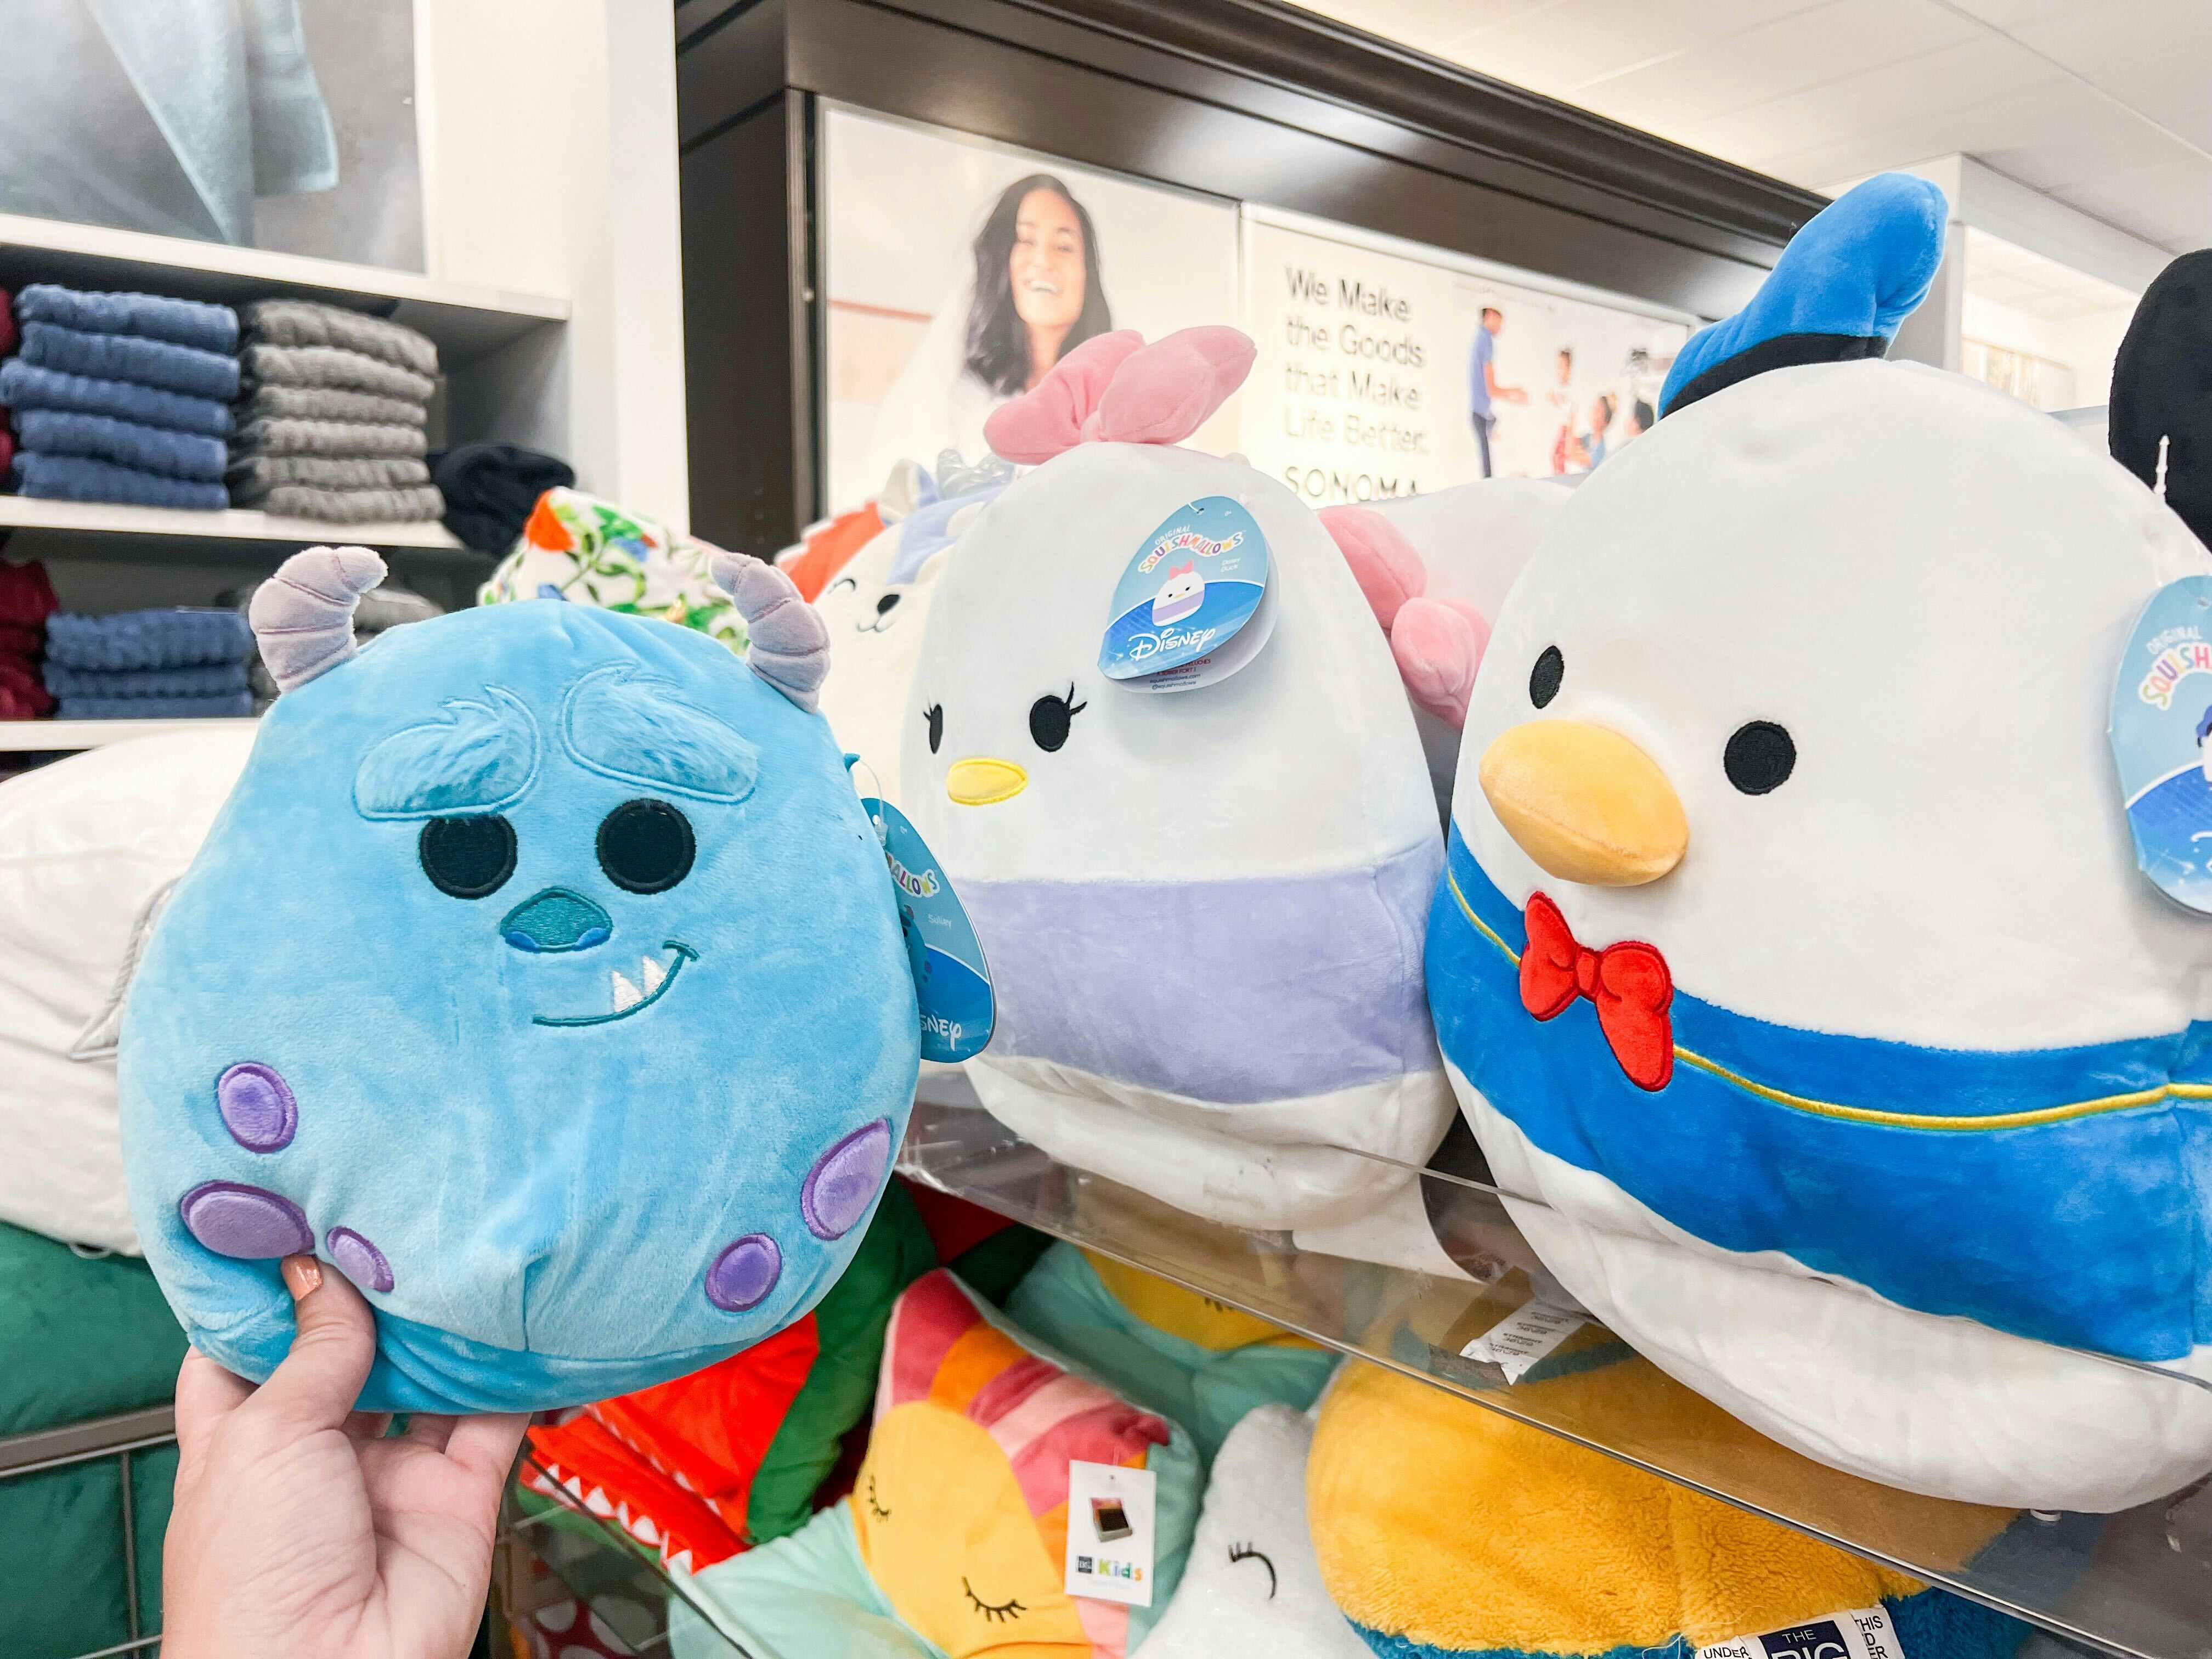 https://prod-cdn-thekrazycouponlady.imgix.net/wp-content/uploads/2022/09/kohls-2022-holiday-top-toy-squishmallow-disney-3-0929225692-1664473591-1664473591.jpg?auto=format&fit=fill&q=25